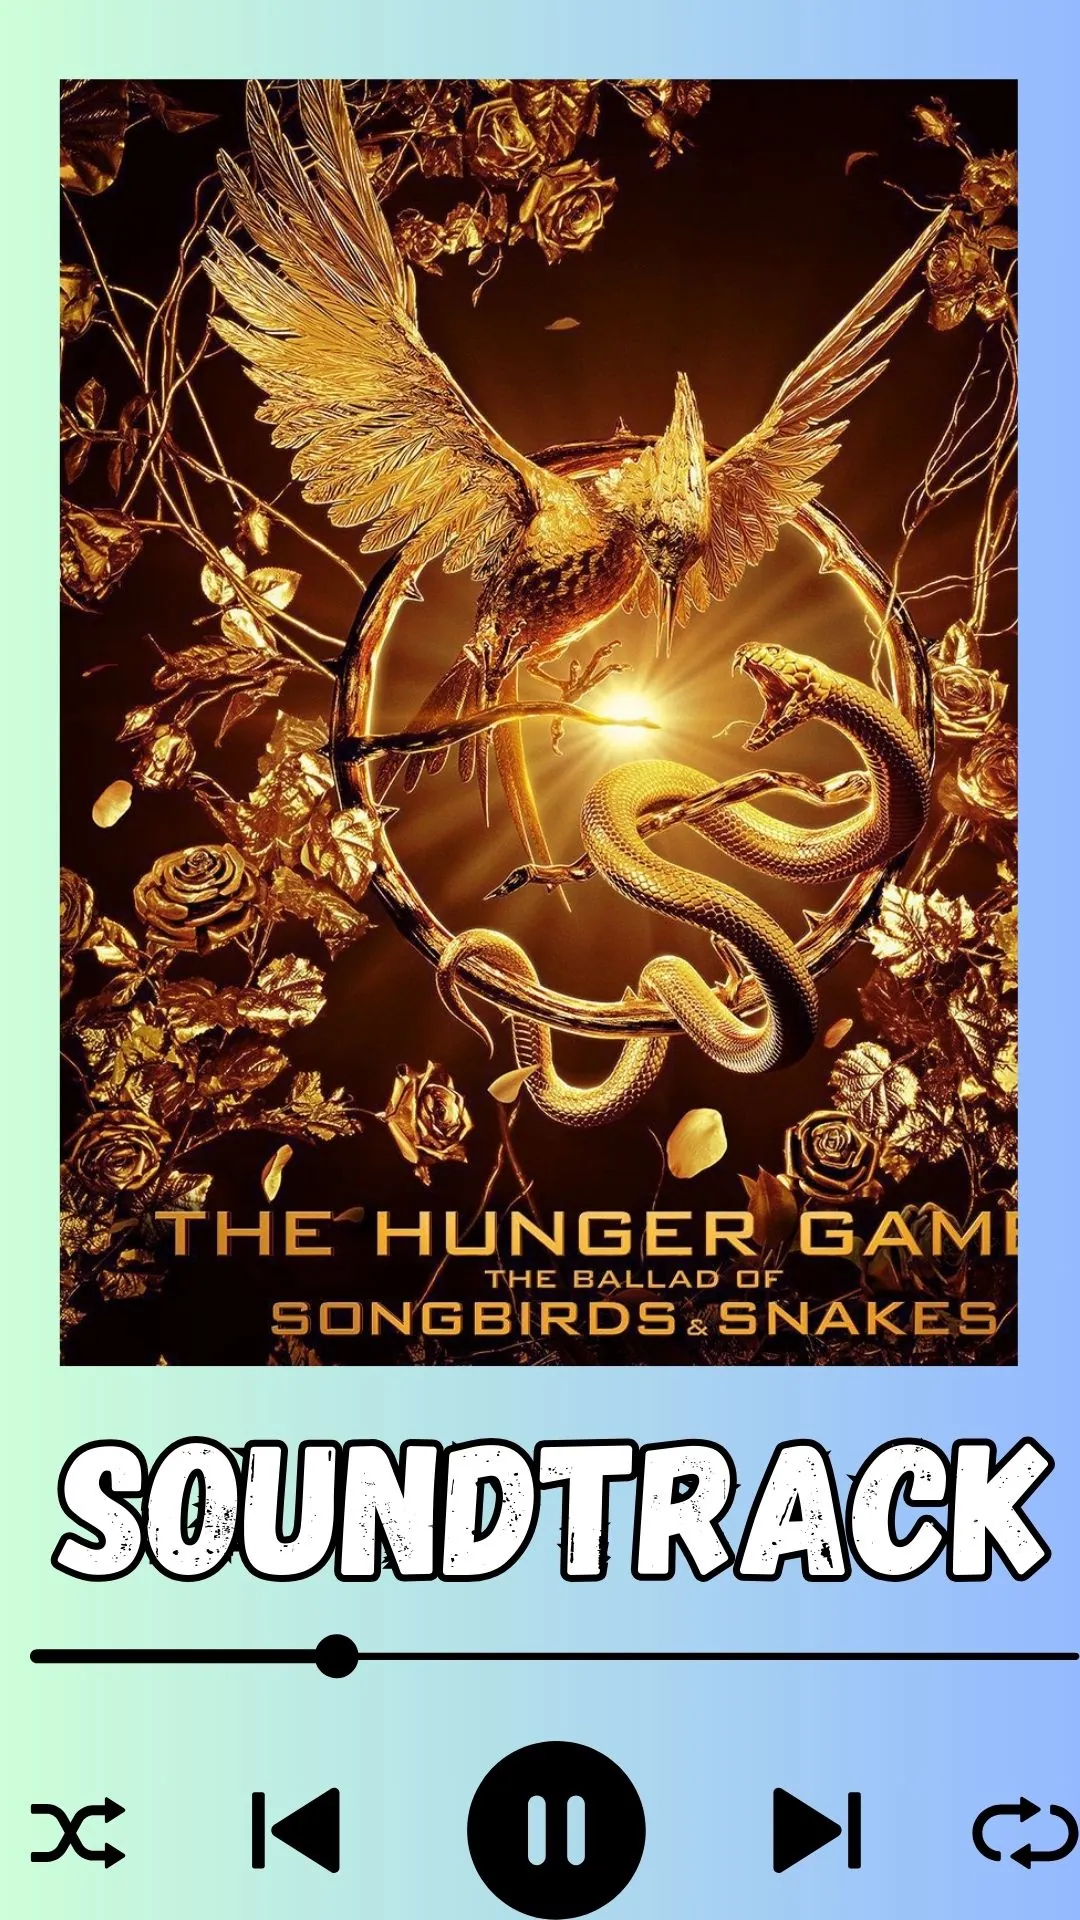 Hunger Games: Ballad of Songbirds and Snakes Trailer, Music